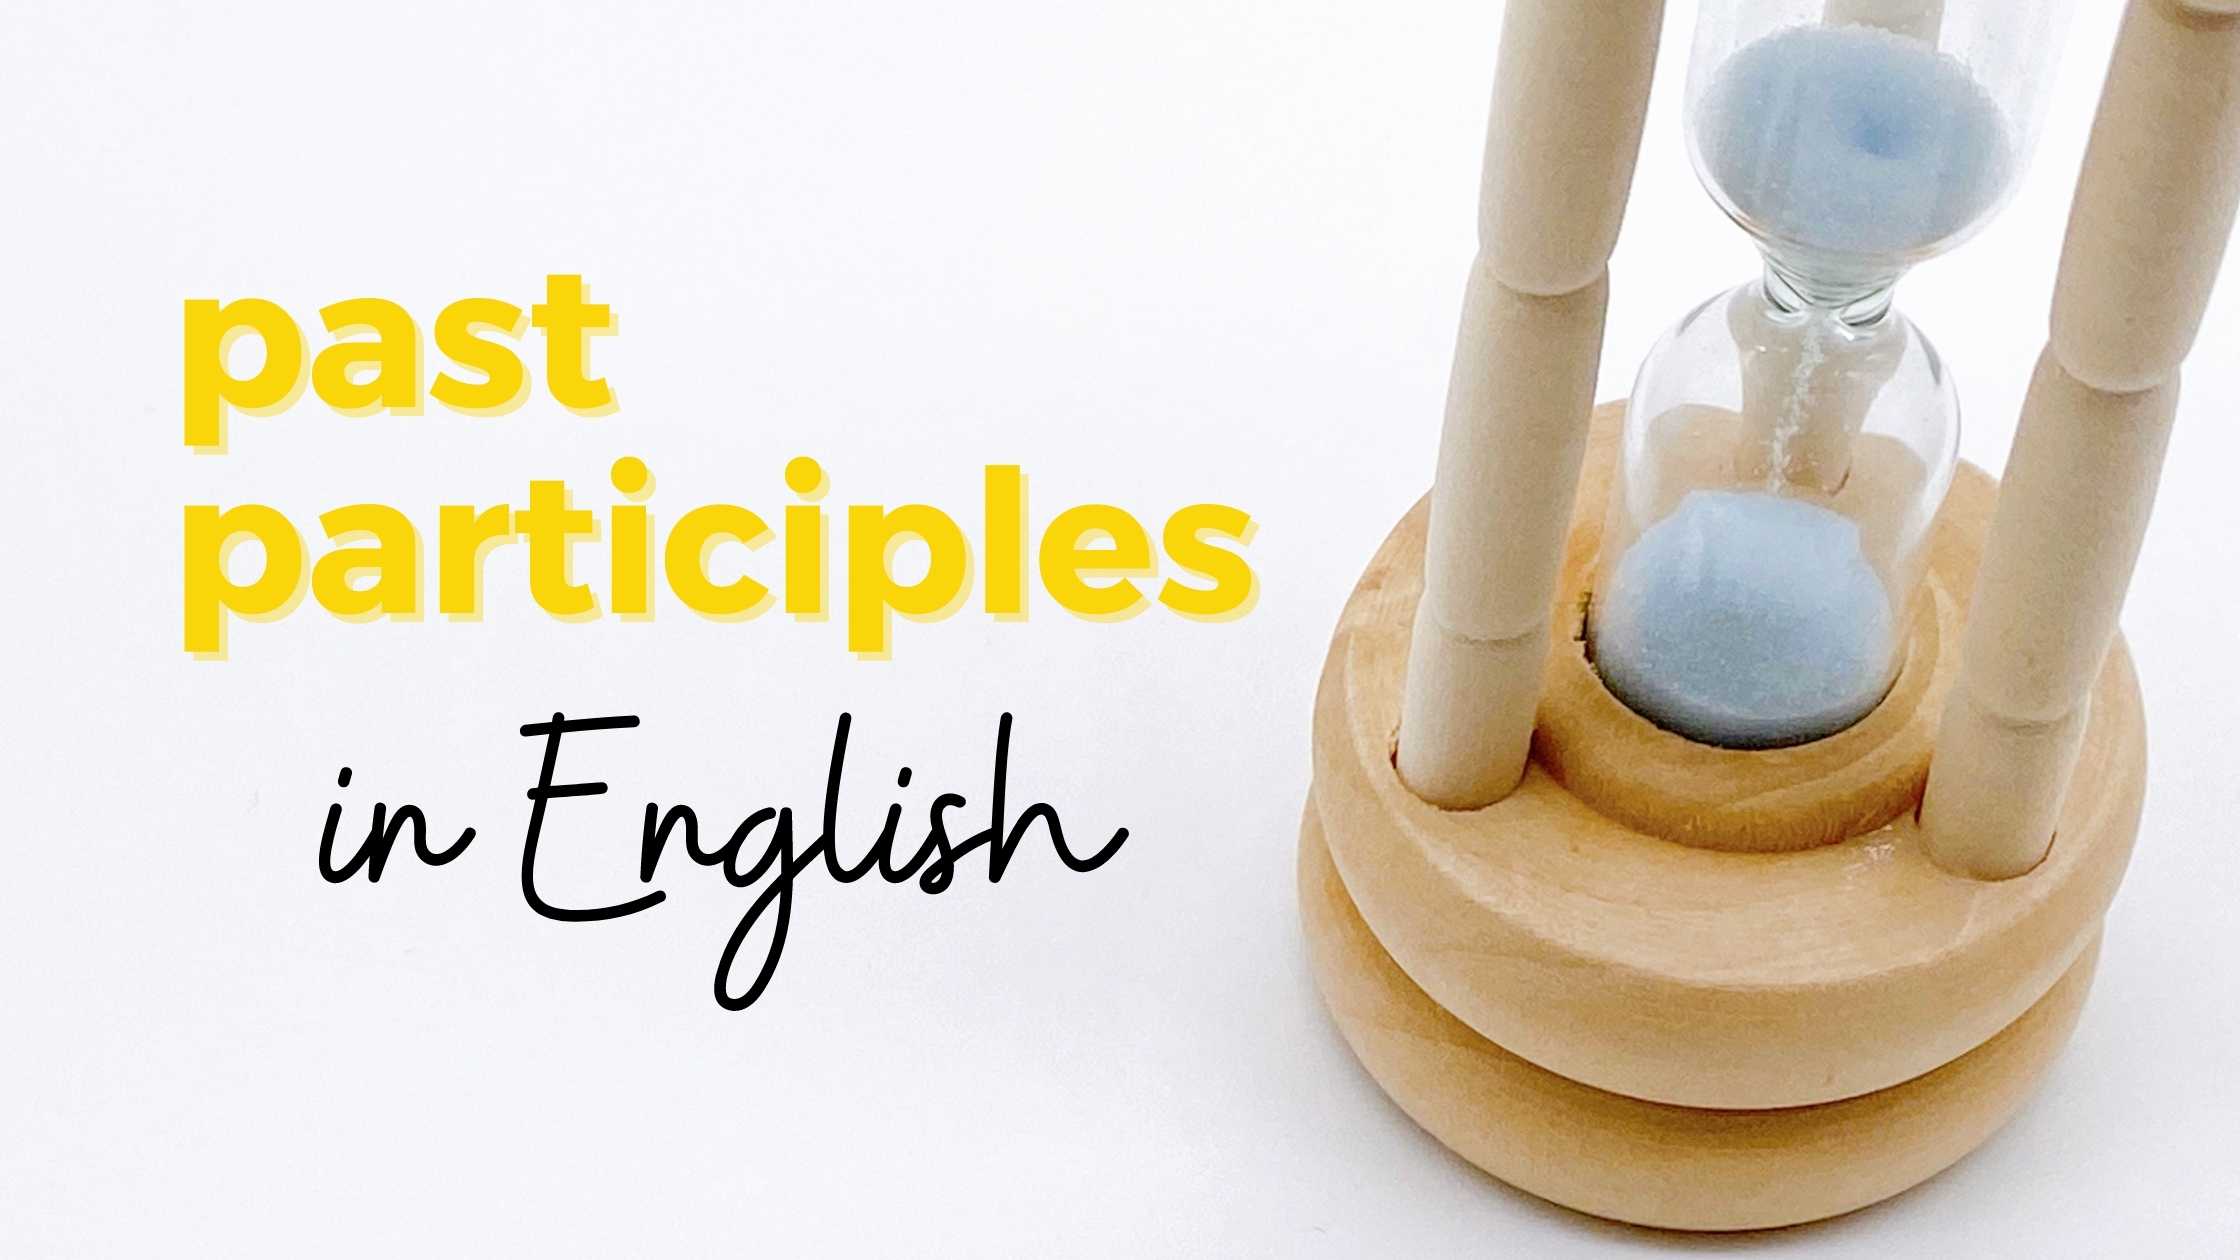 Learn irregular past participles in English